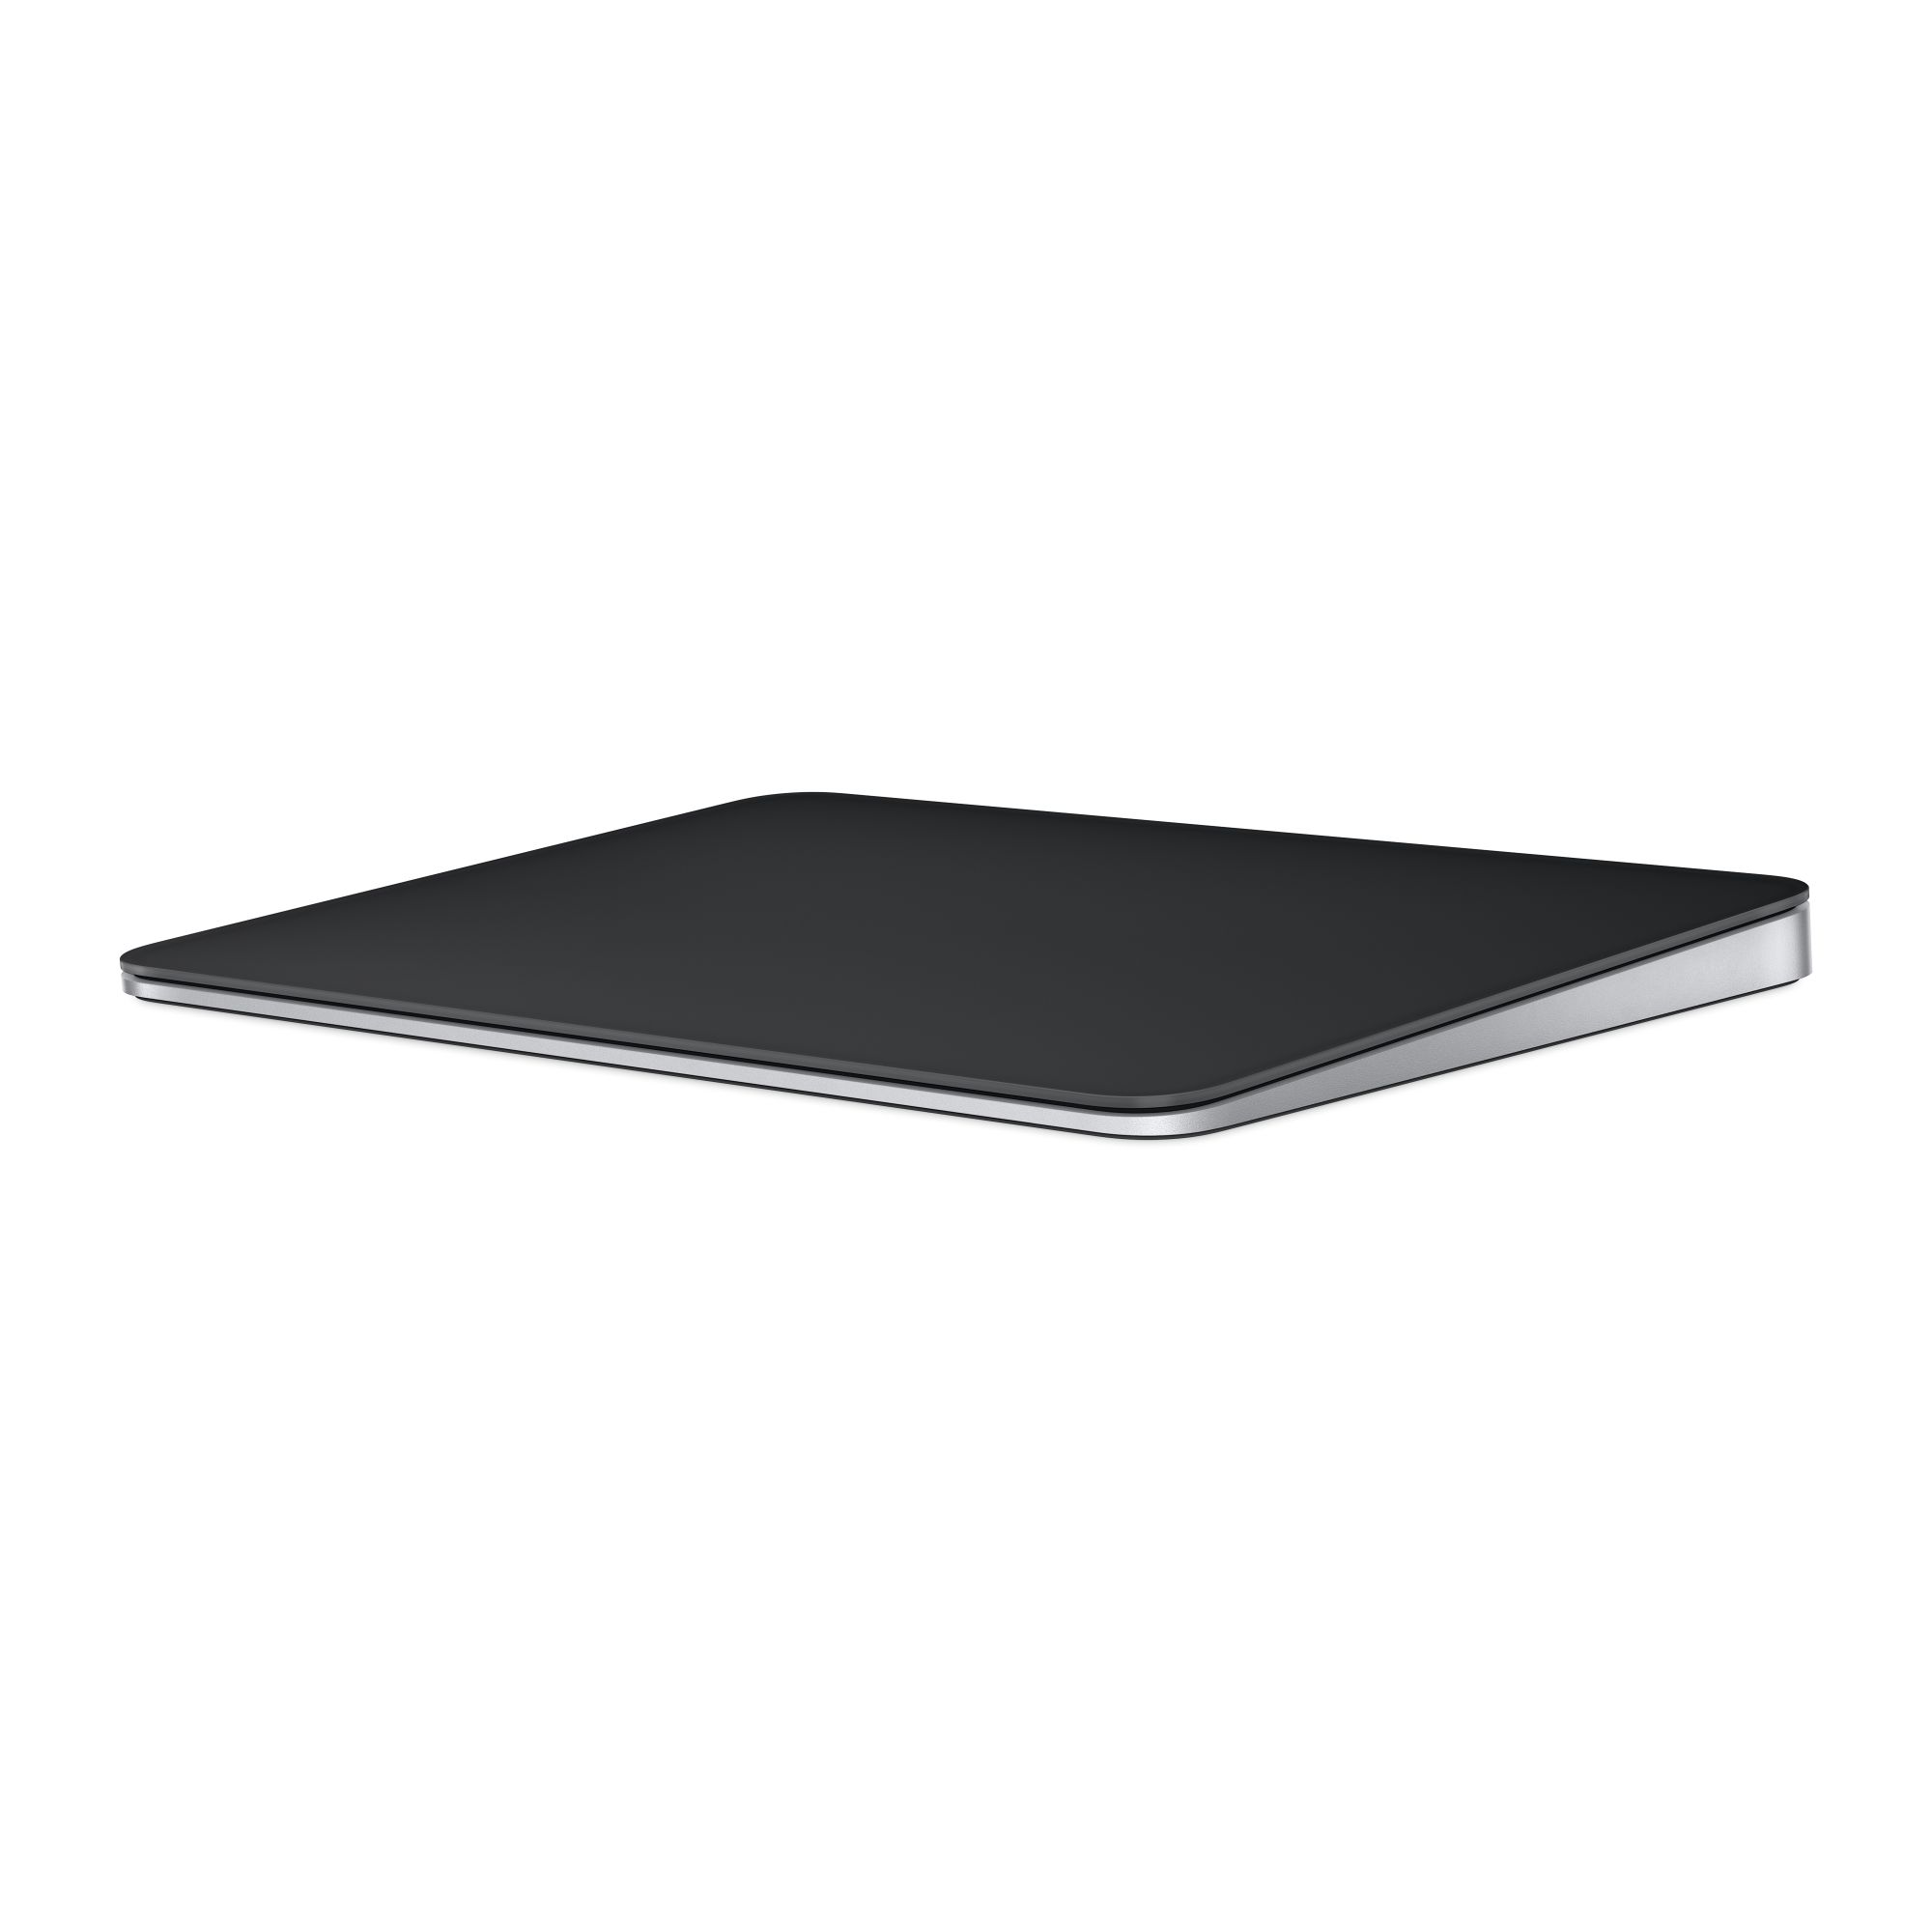 Apple Magic Trackpad Black Multi-Touch Surface